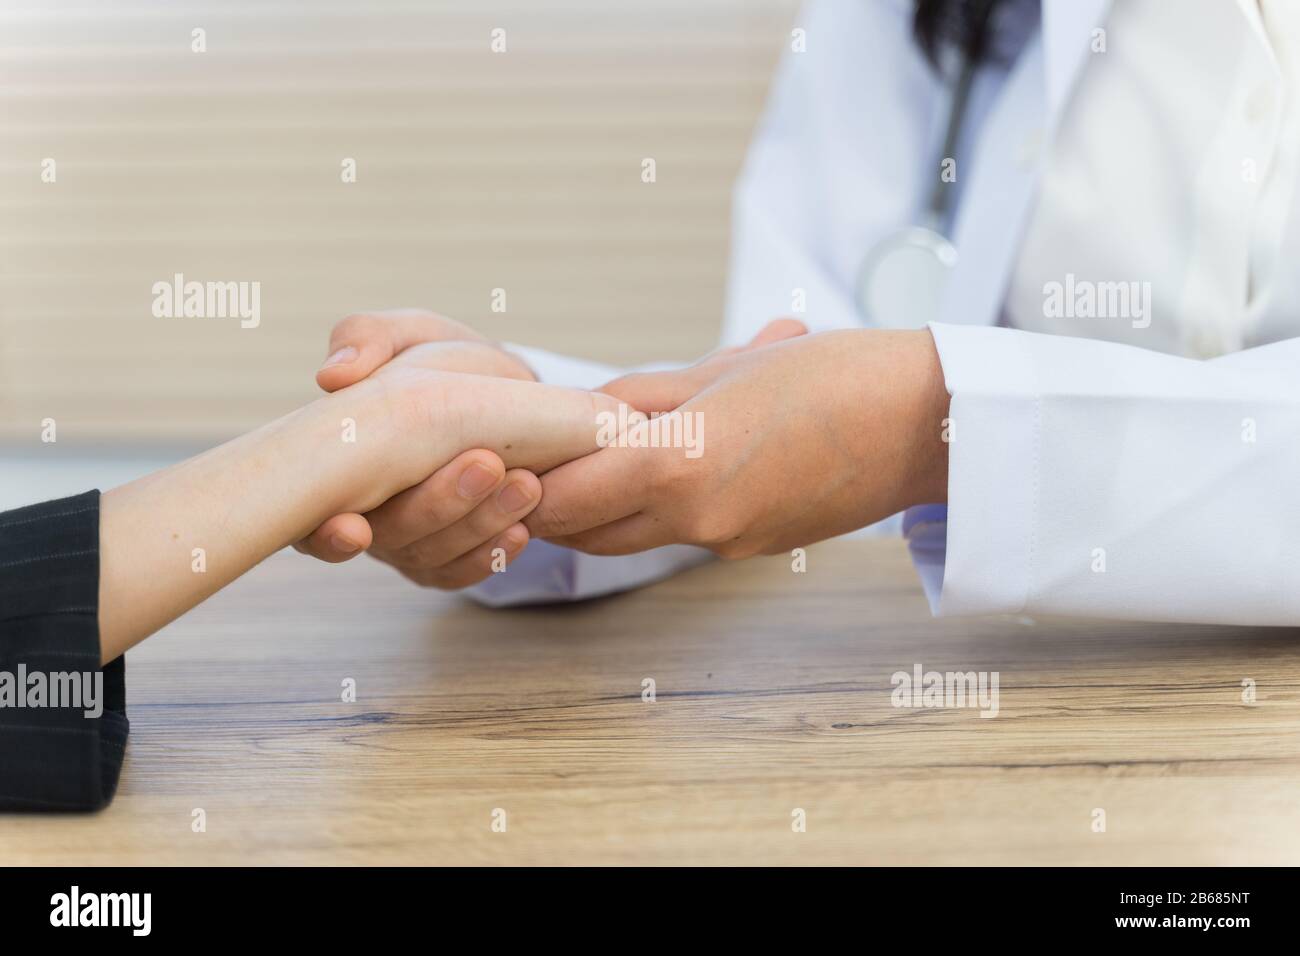 Close up of a doctor holding the patient hands doing basic medical examination and diagnostic. A doctor examines the patient in the hospital. Stock Photo